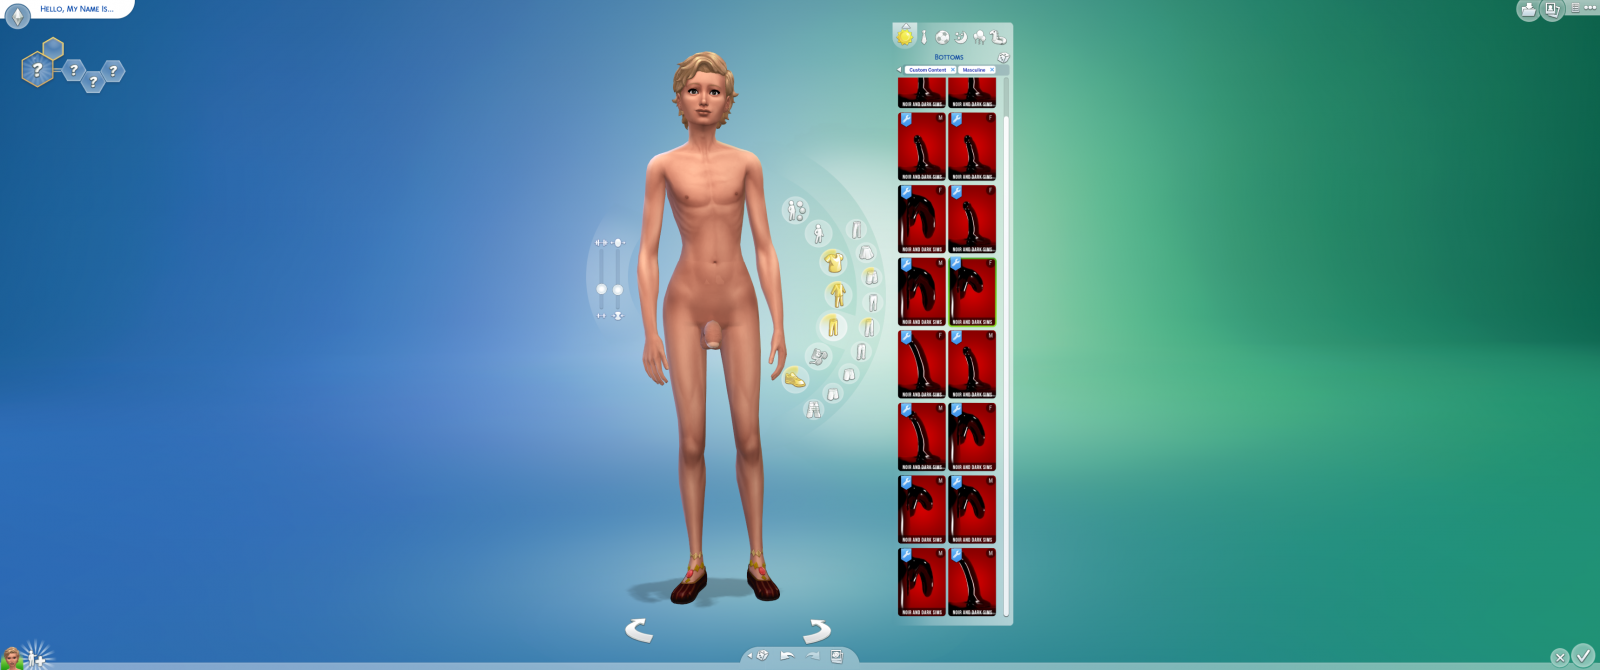 Sims 4 Pornstar Cock V40 Ww Rigged 20190417 Page 12 Downloads The Sims 4